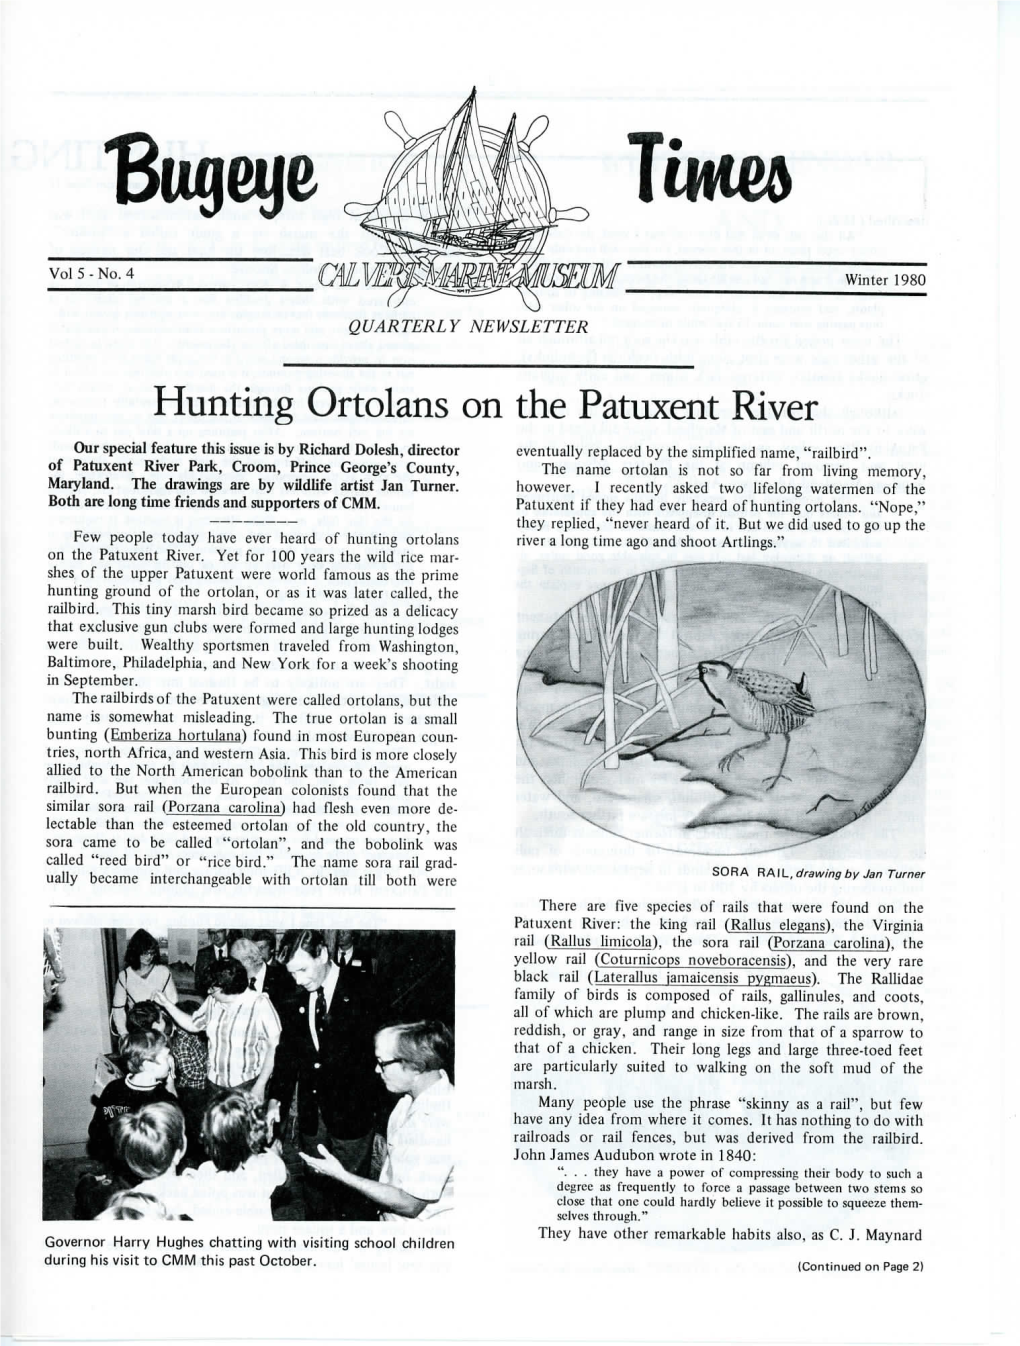 Hunting Ortolans on the Patuxent River